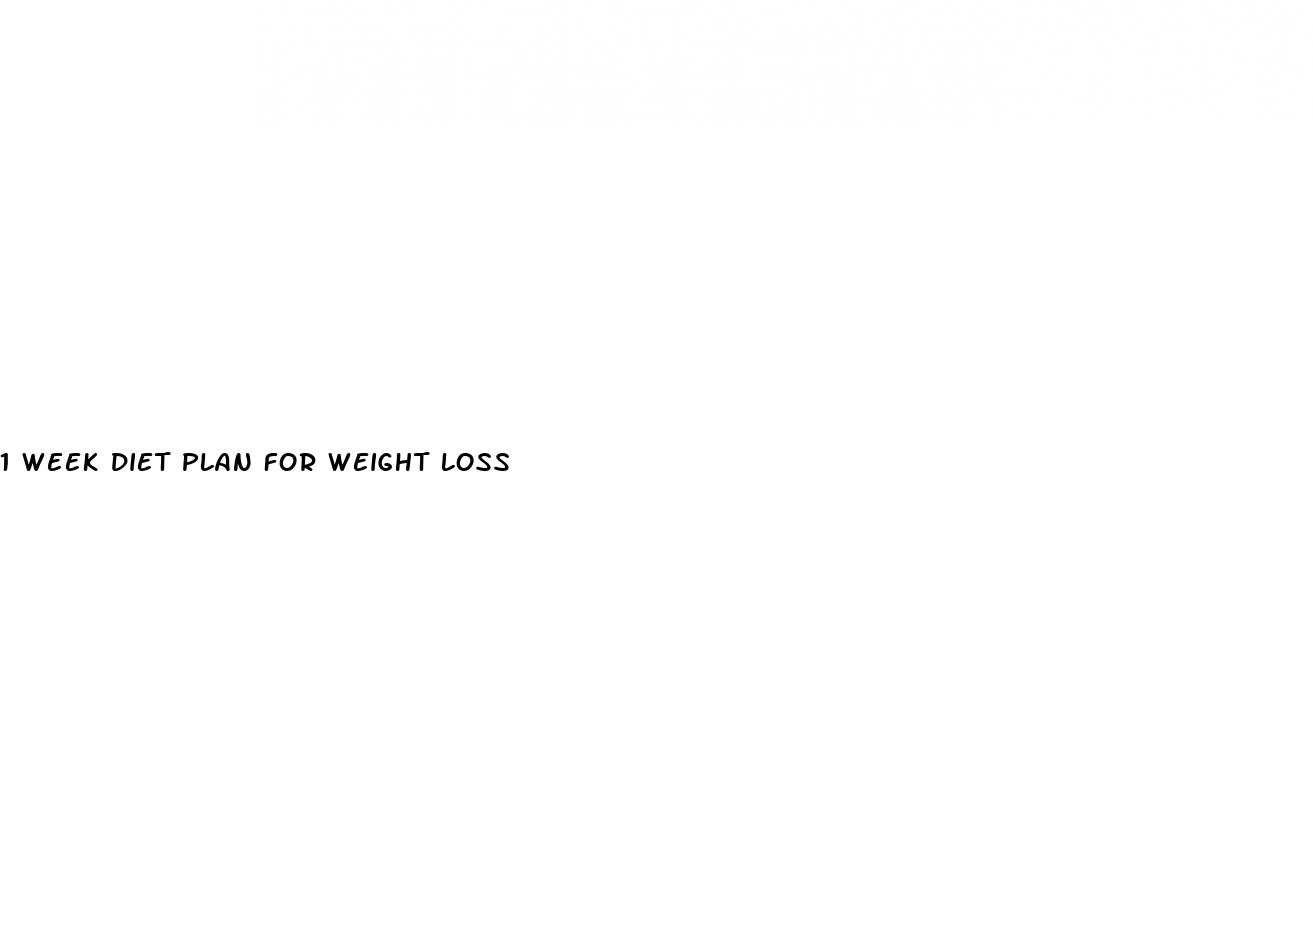 1 week diet plan for weight loss